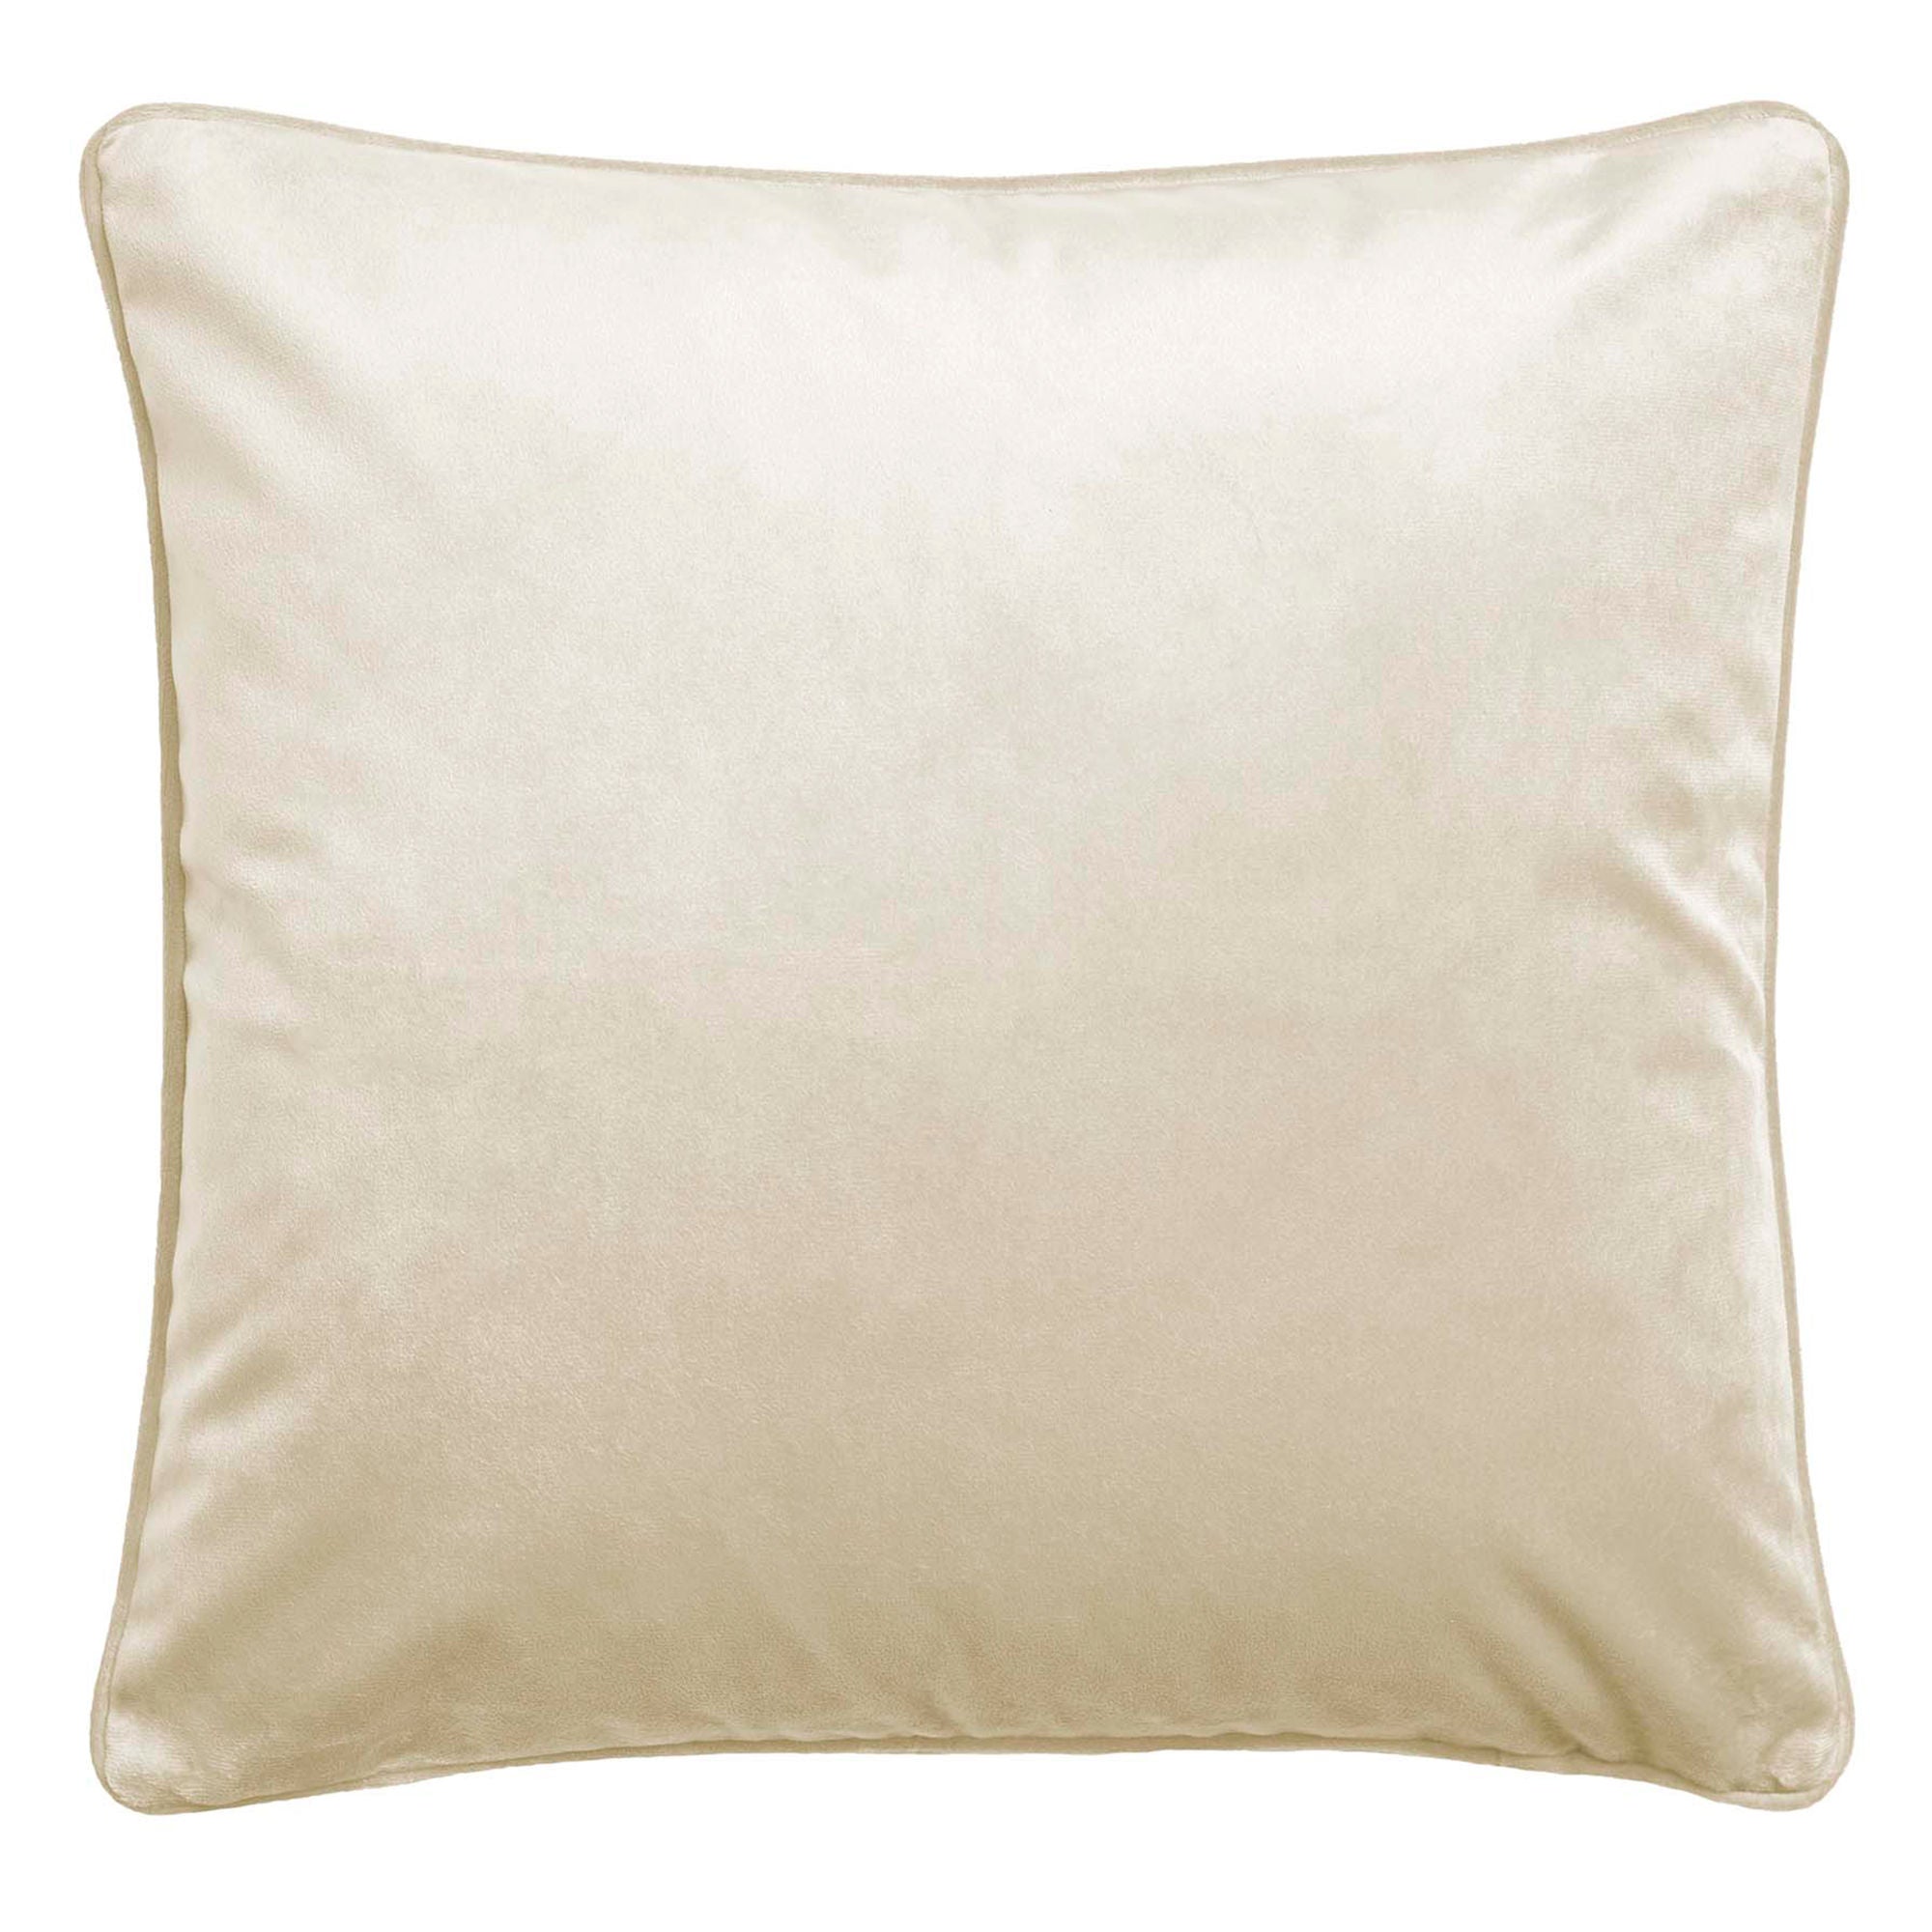 Montrose Cushion by Laurence Llewelyn-Bowen in Ivory 43 x 43cm - Cushion - Laurence Llewelyn-Bowen